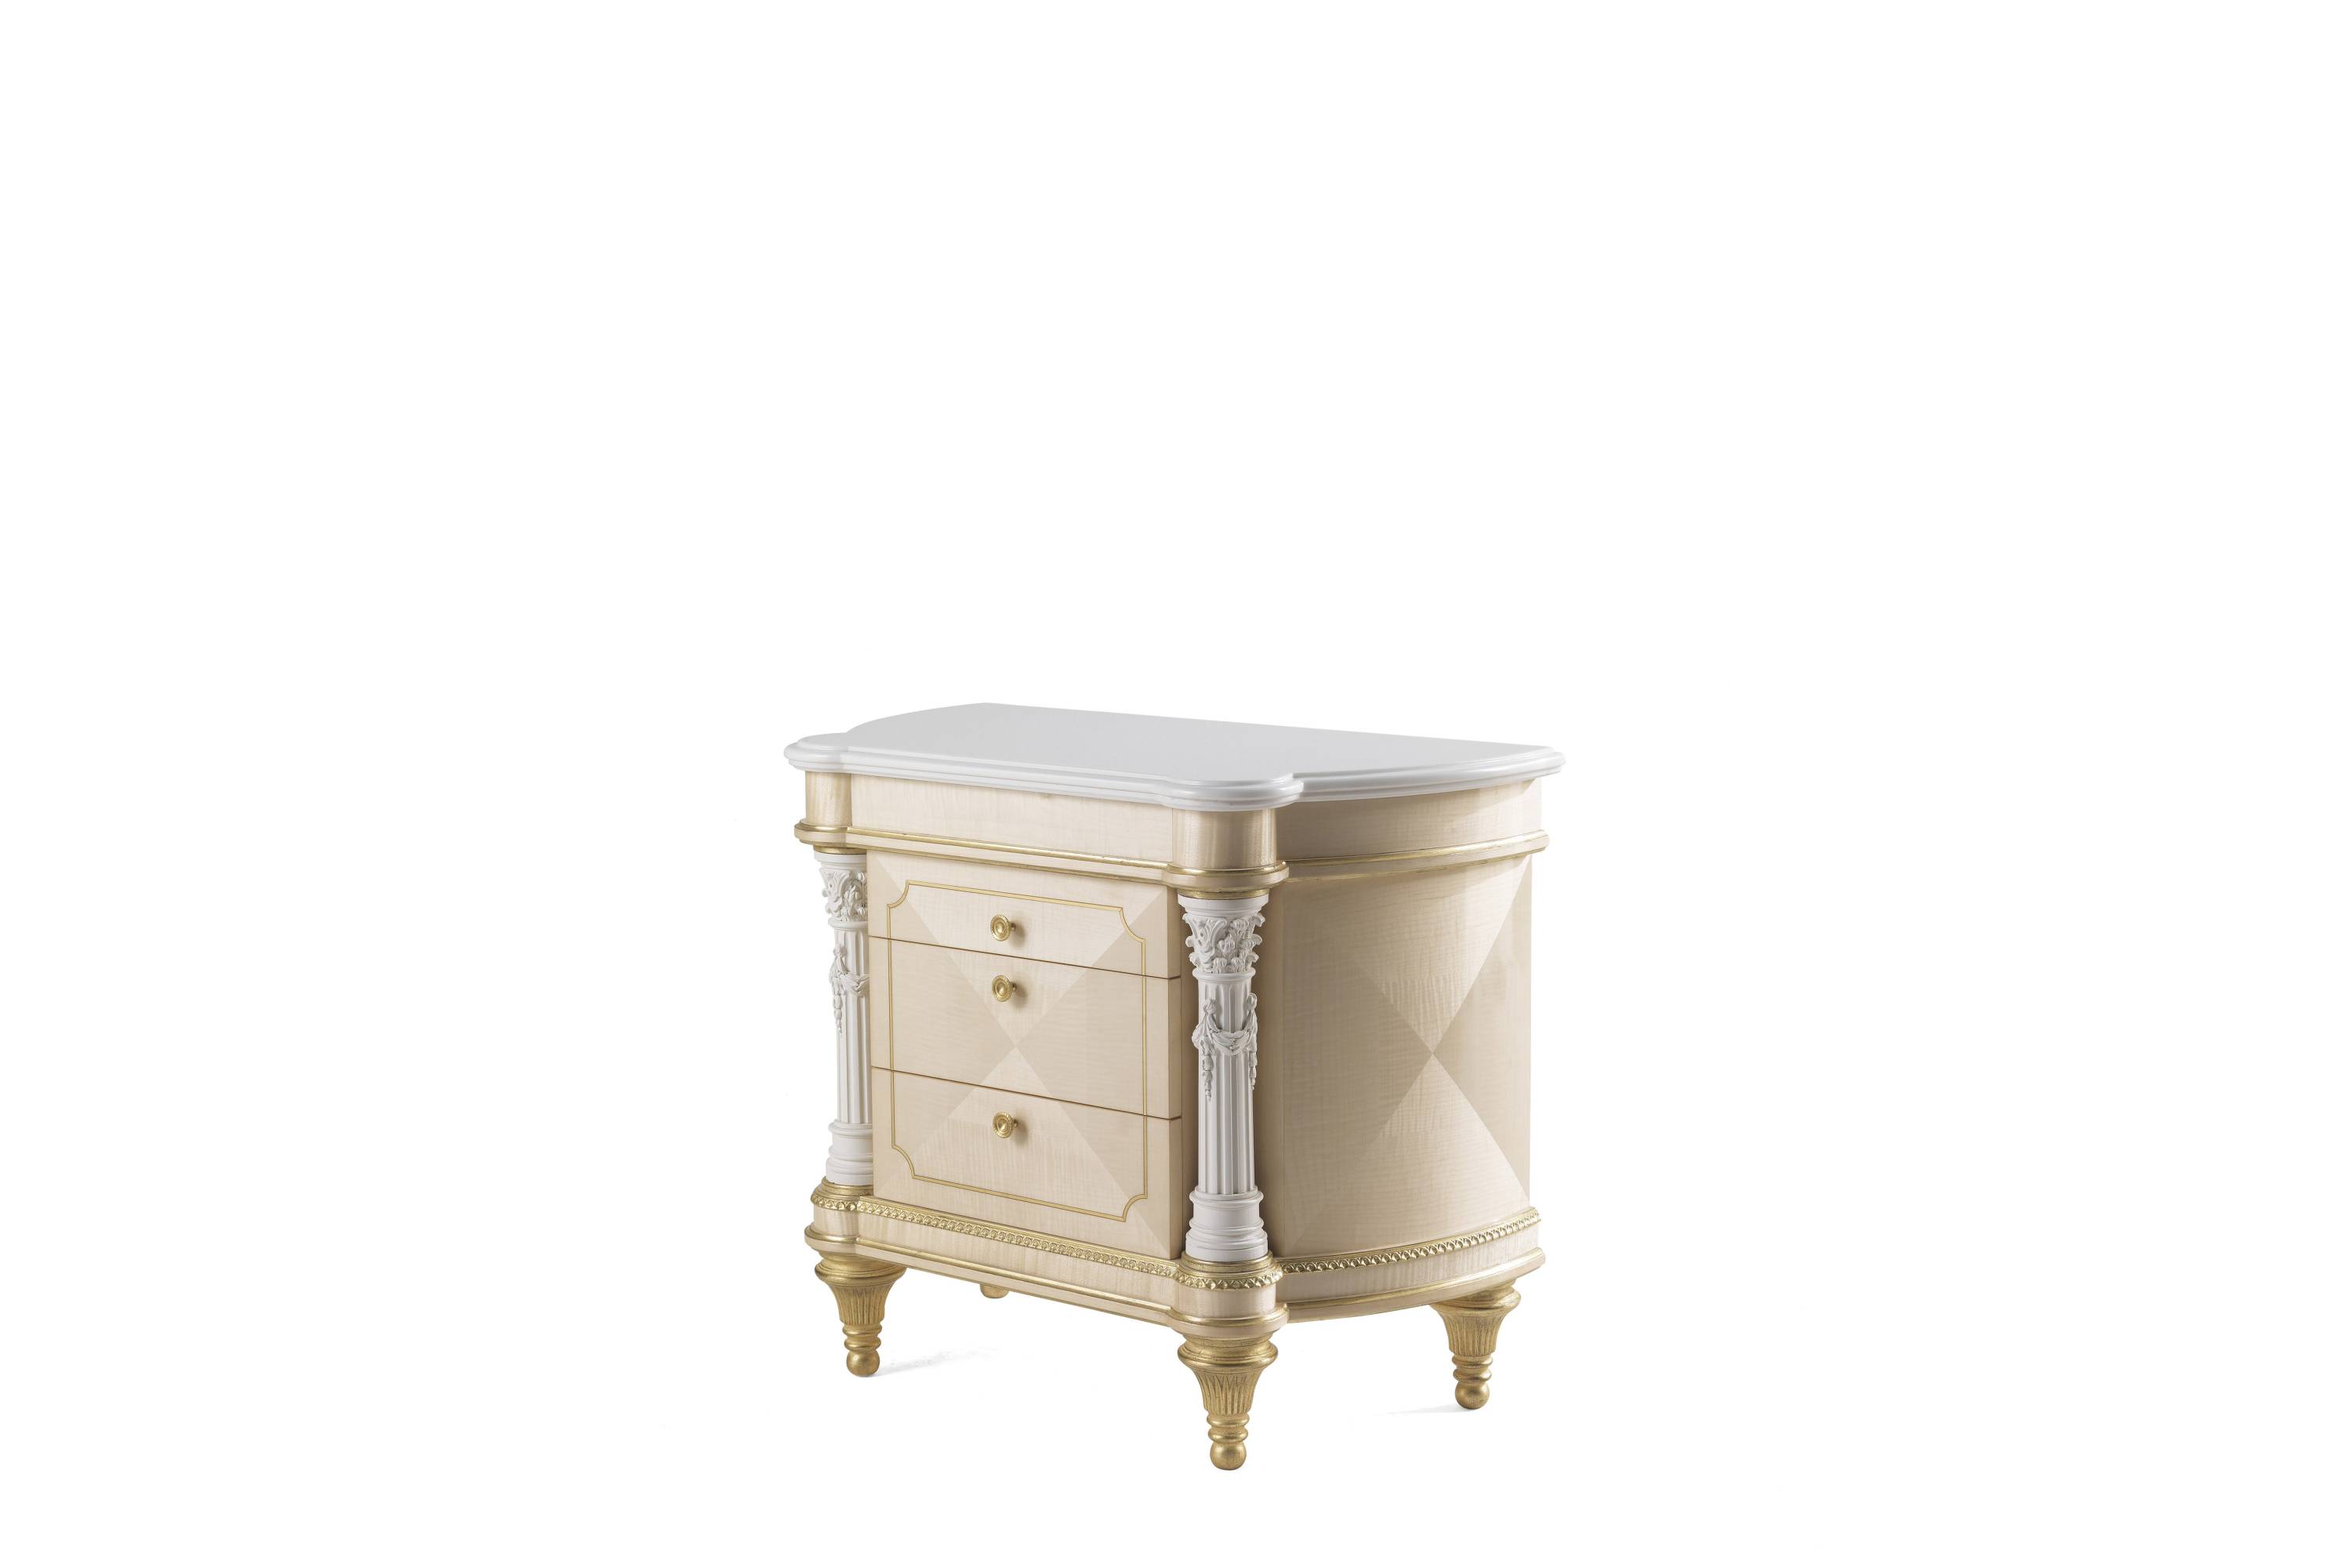 TOULOUSE night table – Transform your space with sophisticated Made in Italy classic night storage units.